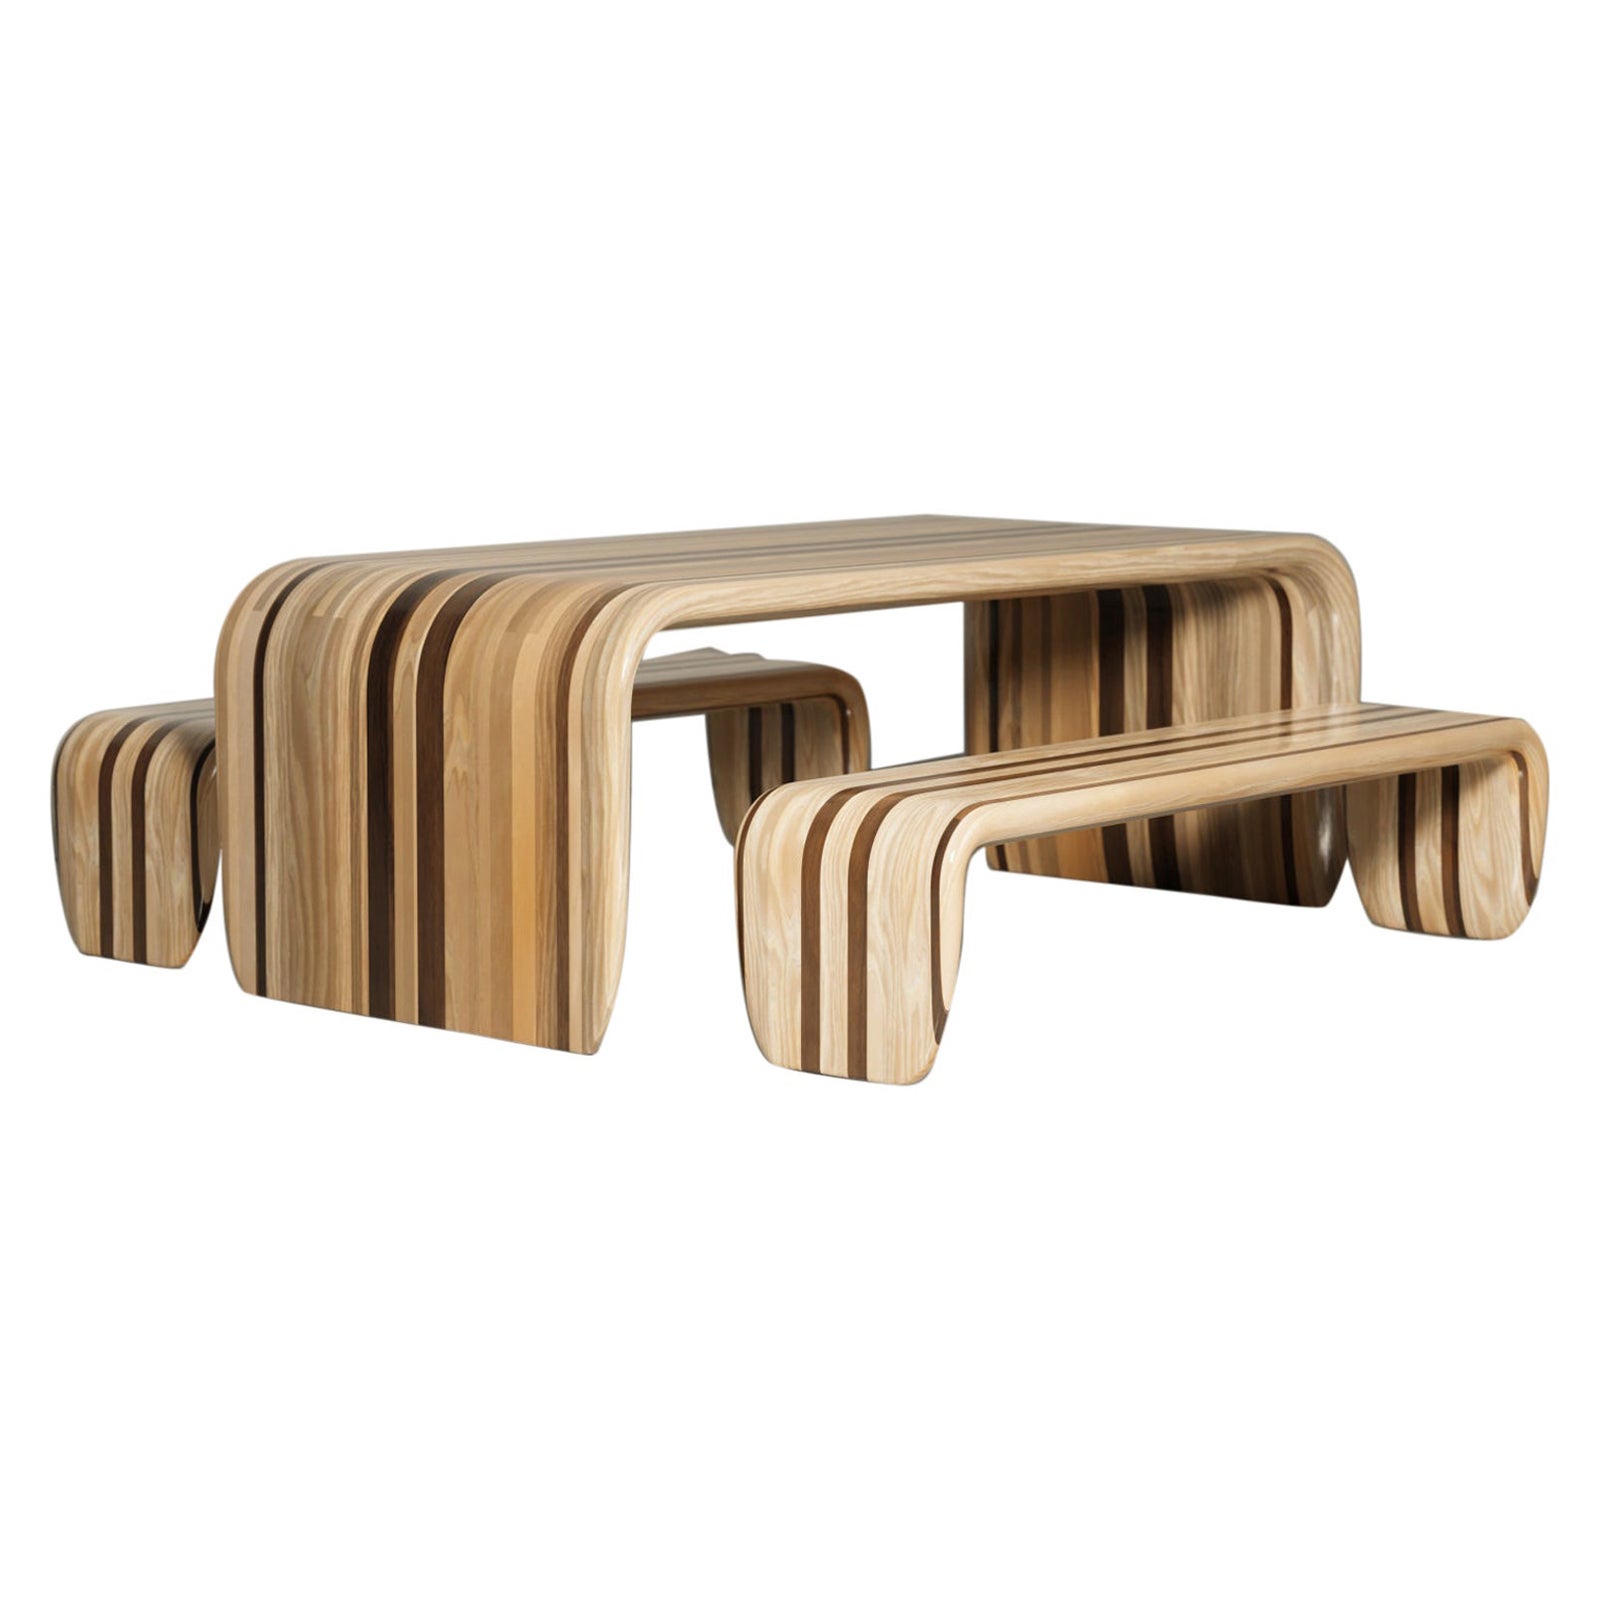 Set of Surf-Ace Table and 2 Benches by Duffy London